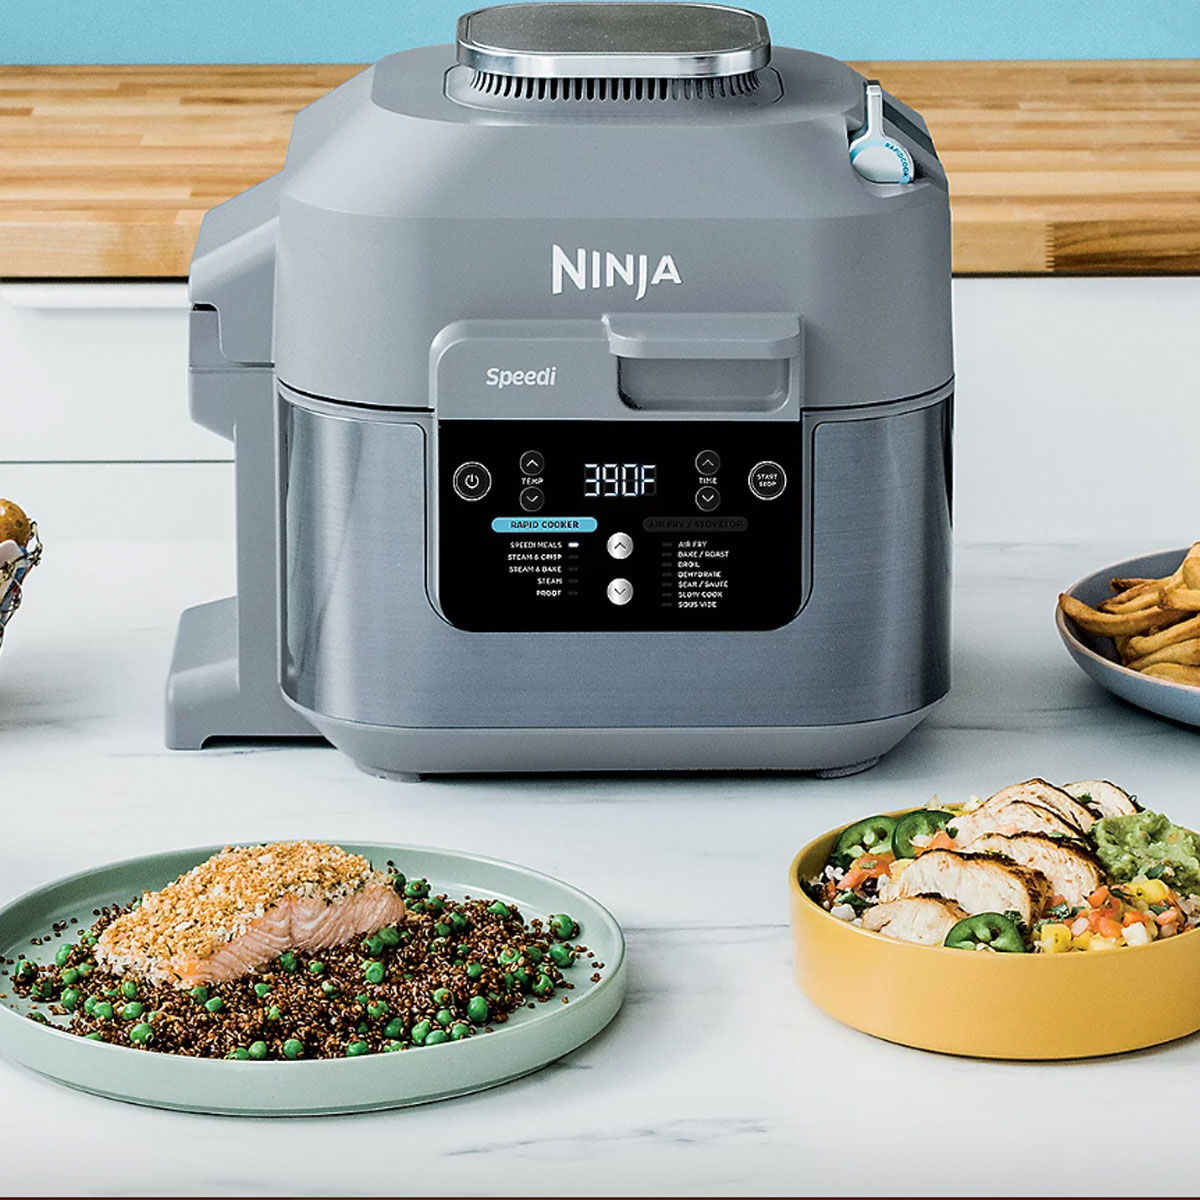 Ninja Rapid Cooker that makes healthy meals in just 15 minutes has over  £100 off: 'Has transformed the way we cook